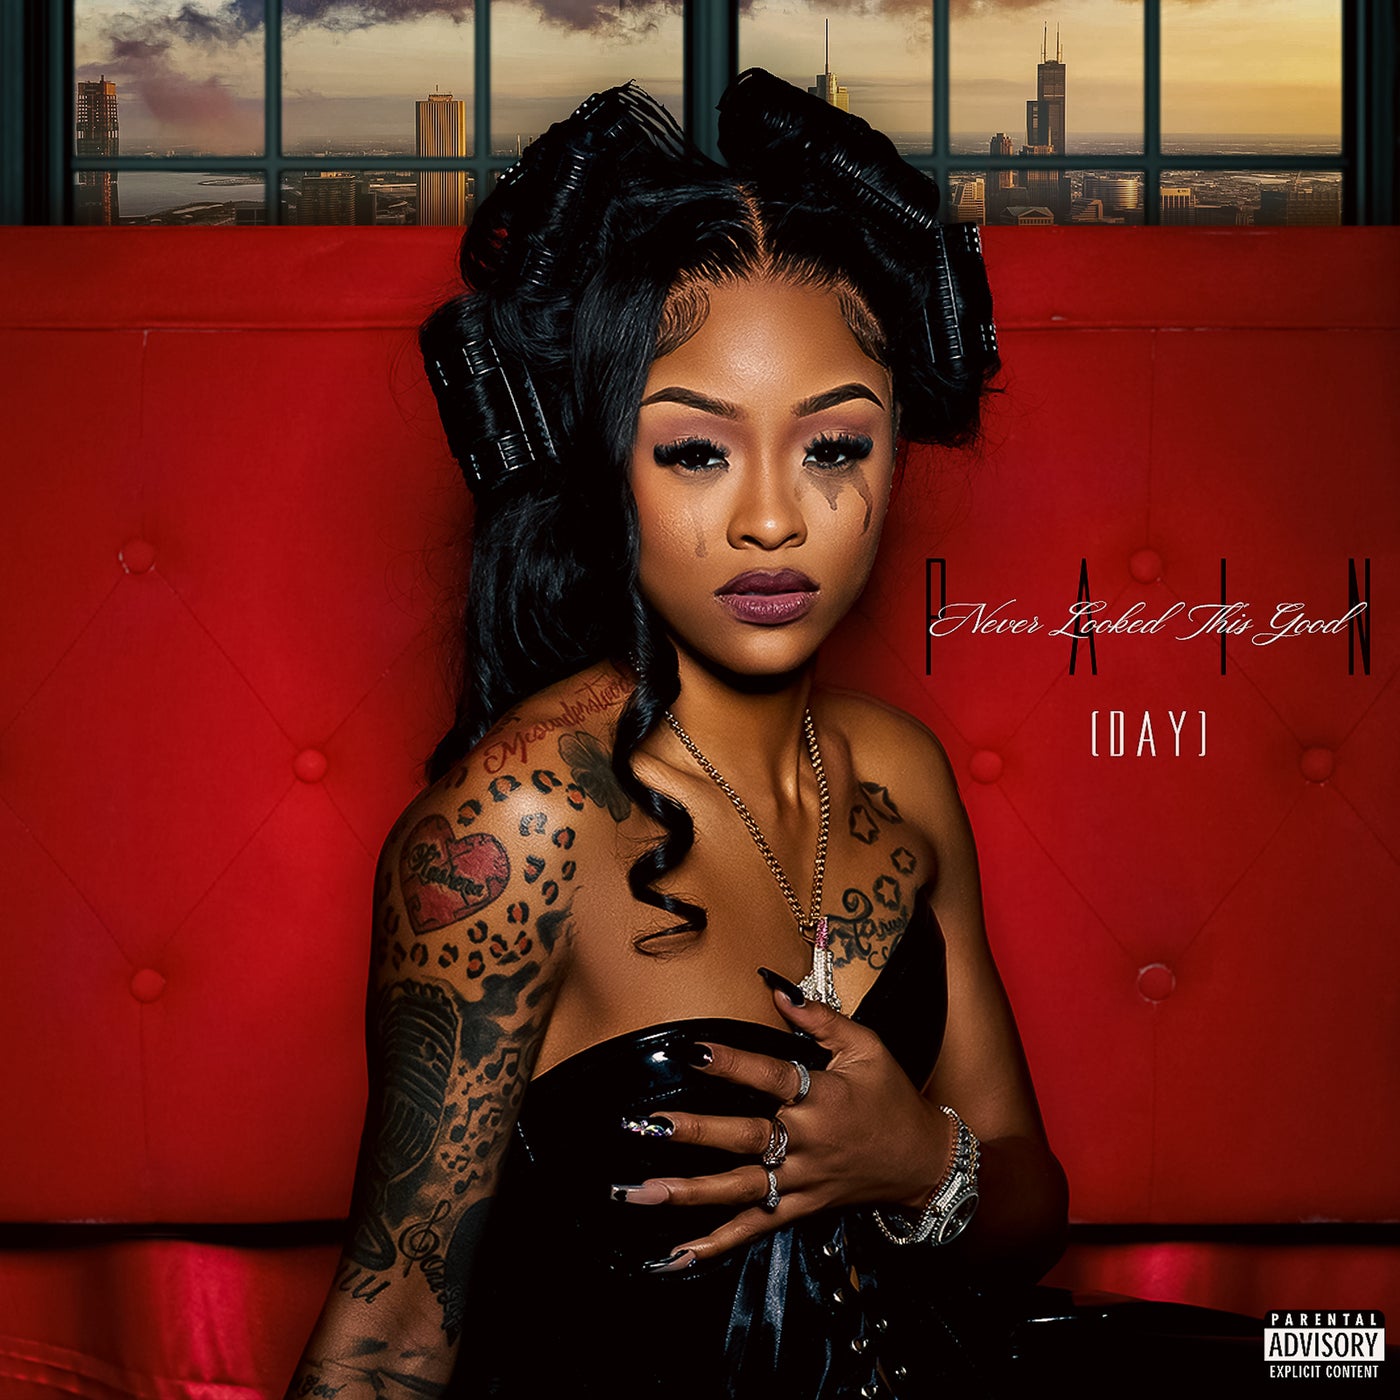 Pain Never Looked This Good (Day) by Ann Marie, Tink and G Herbo 